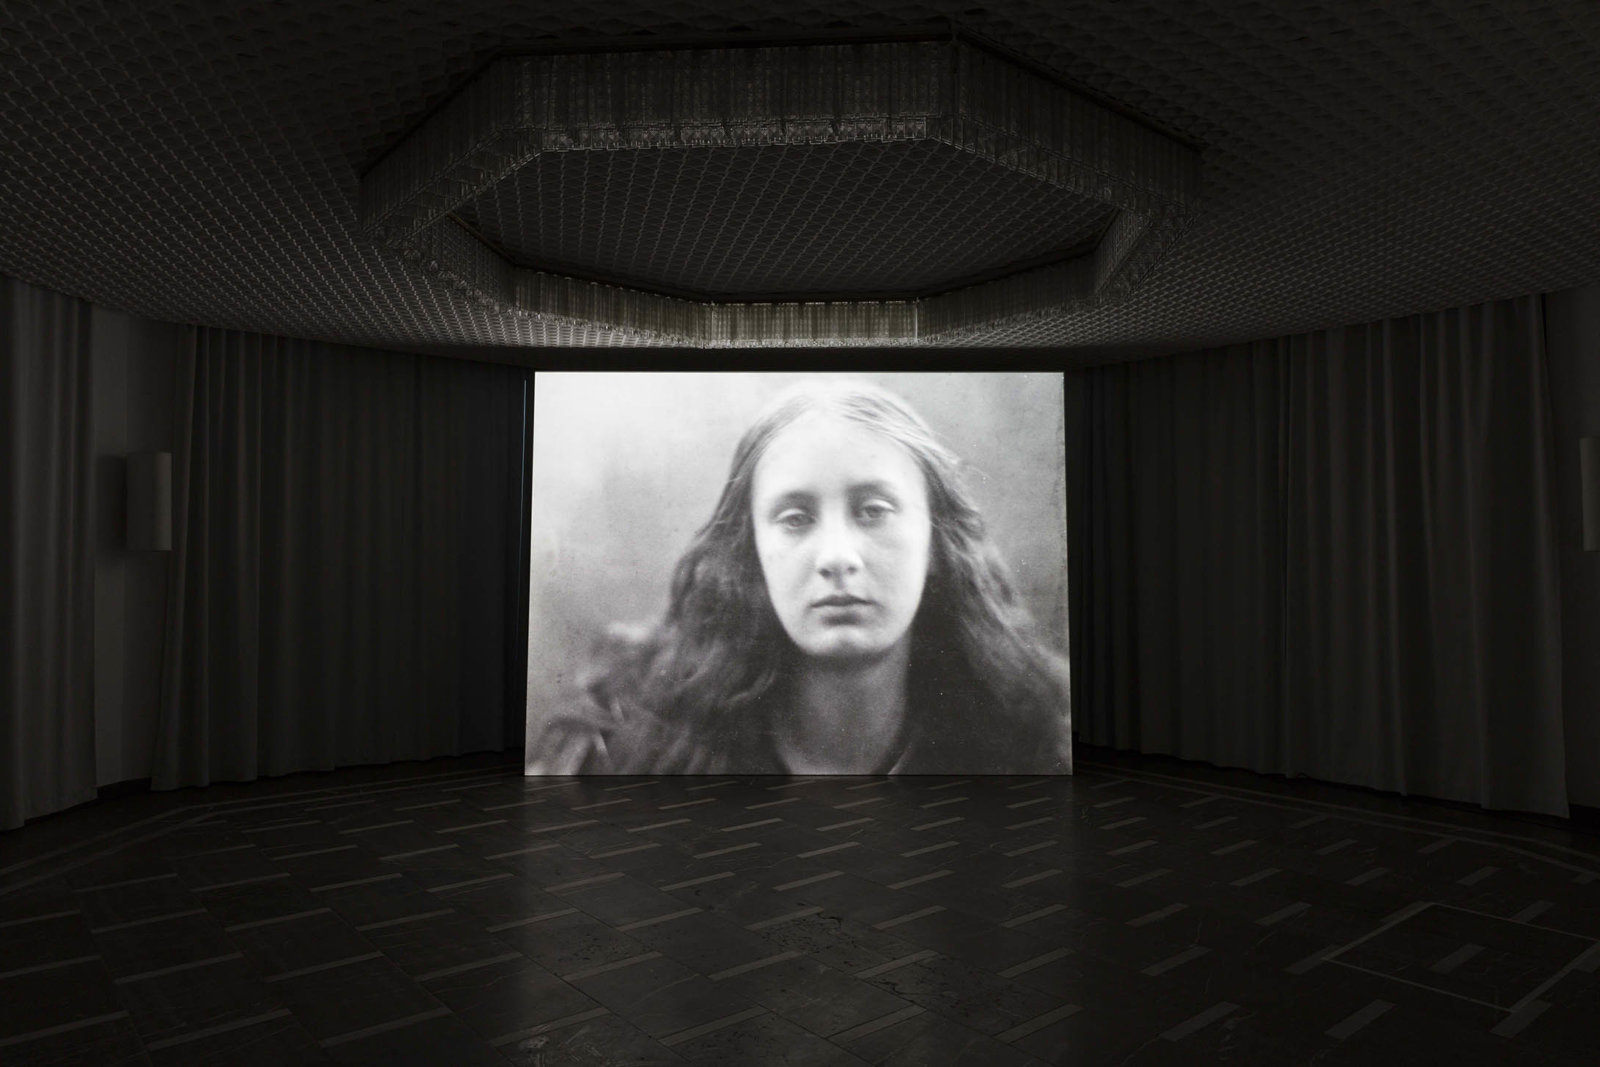 Geoffrey Farmer, Look in my face; my name is Might-have-been; I am also called No-more, Too-late, Farewell, 2010–2014, computer-generated algorithmic montage sequence, dimensions variable. Installation view, The Care With Which The Rain Is Wrong, Schinkel Pavillon, Berlin, Germany, 2017